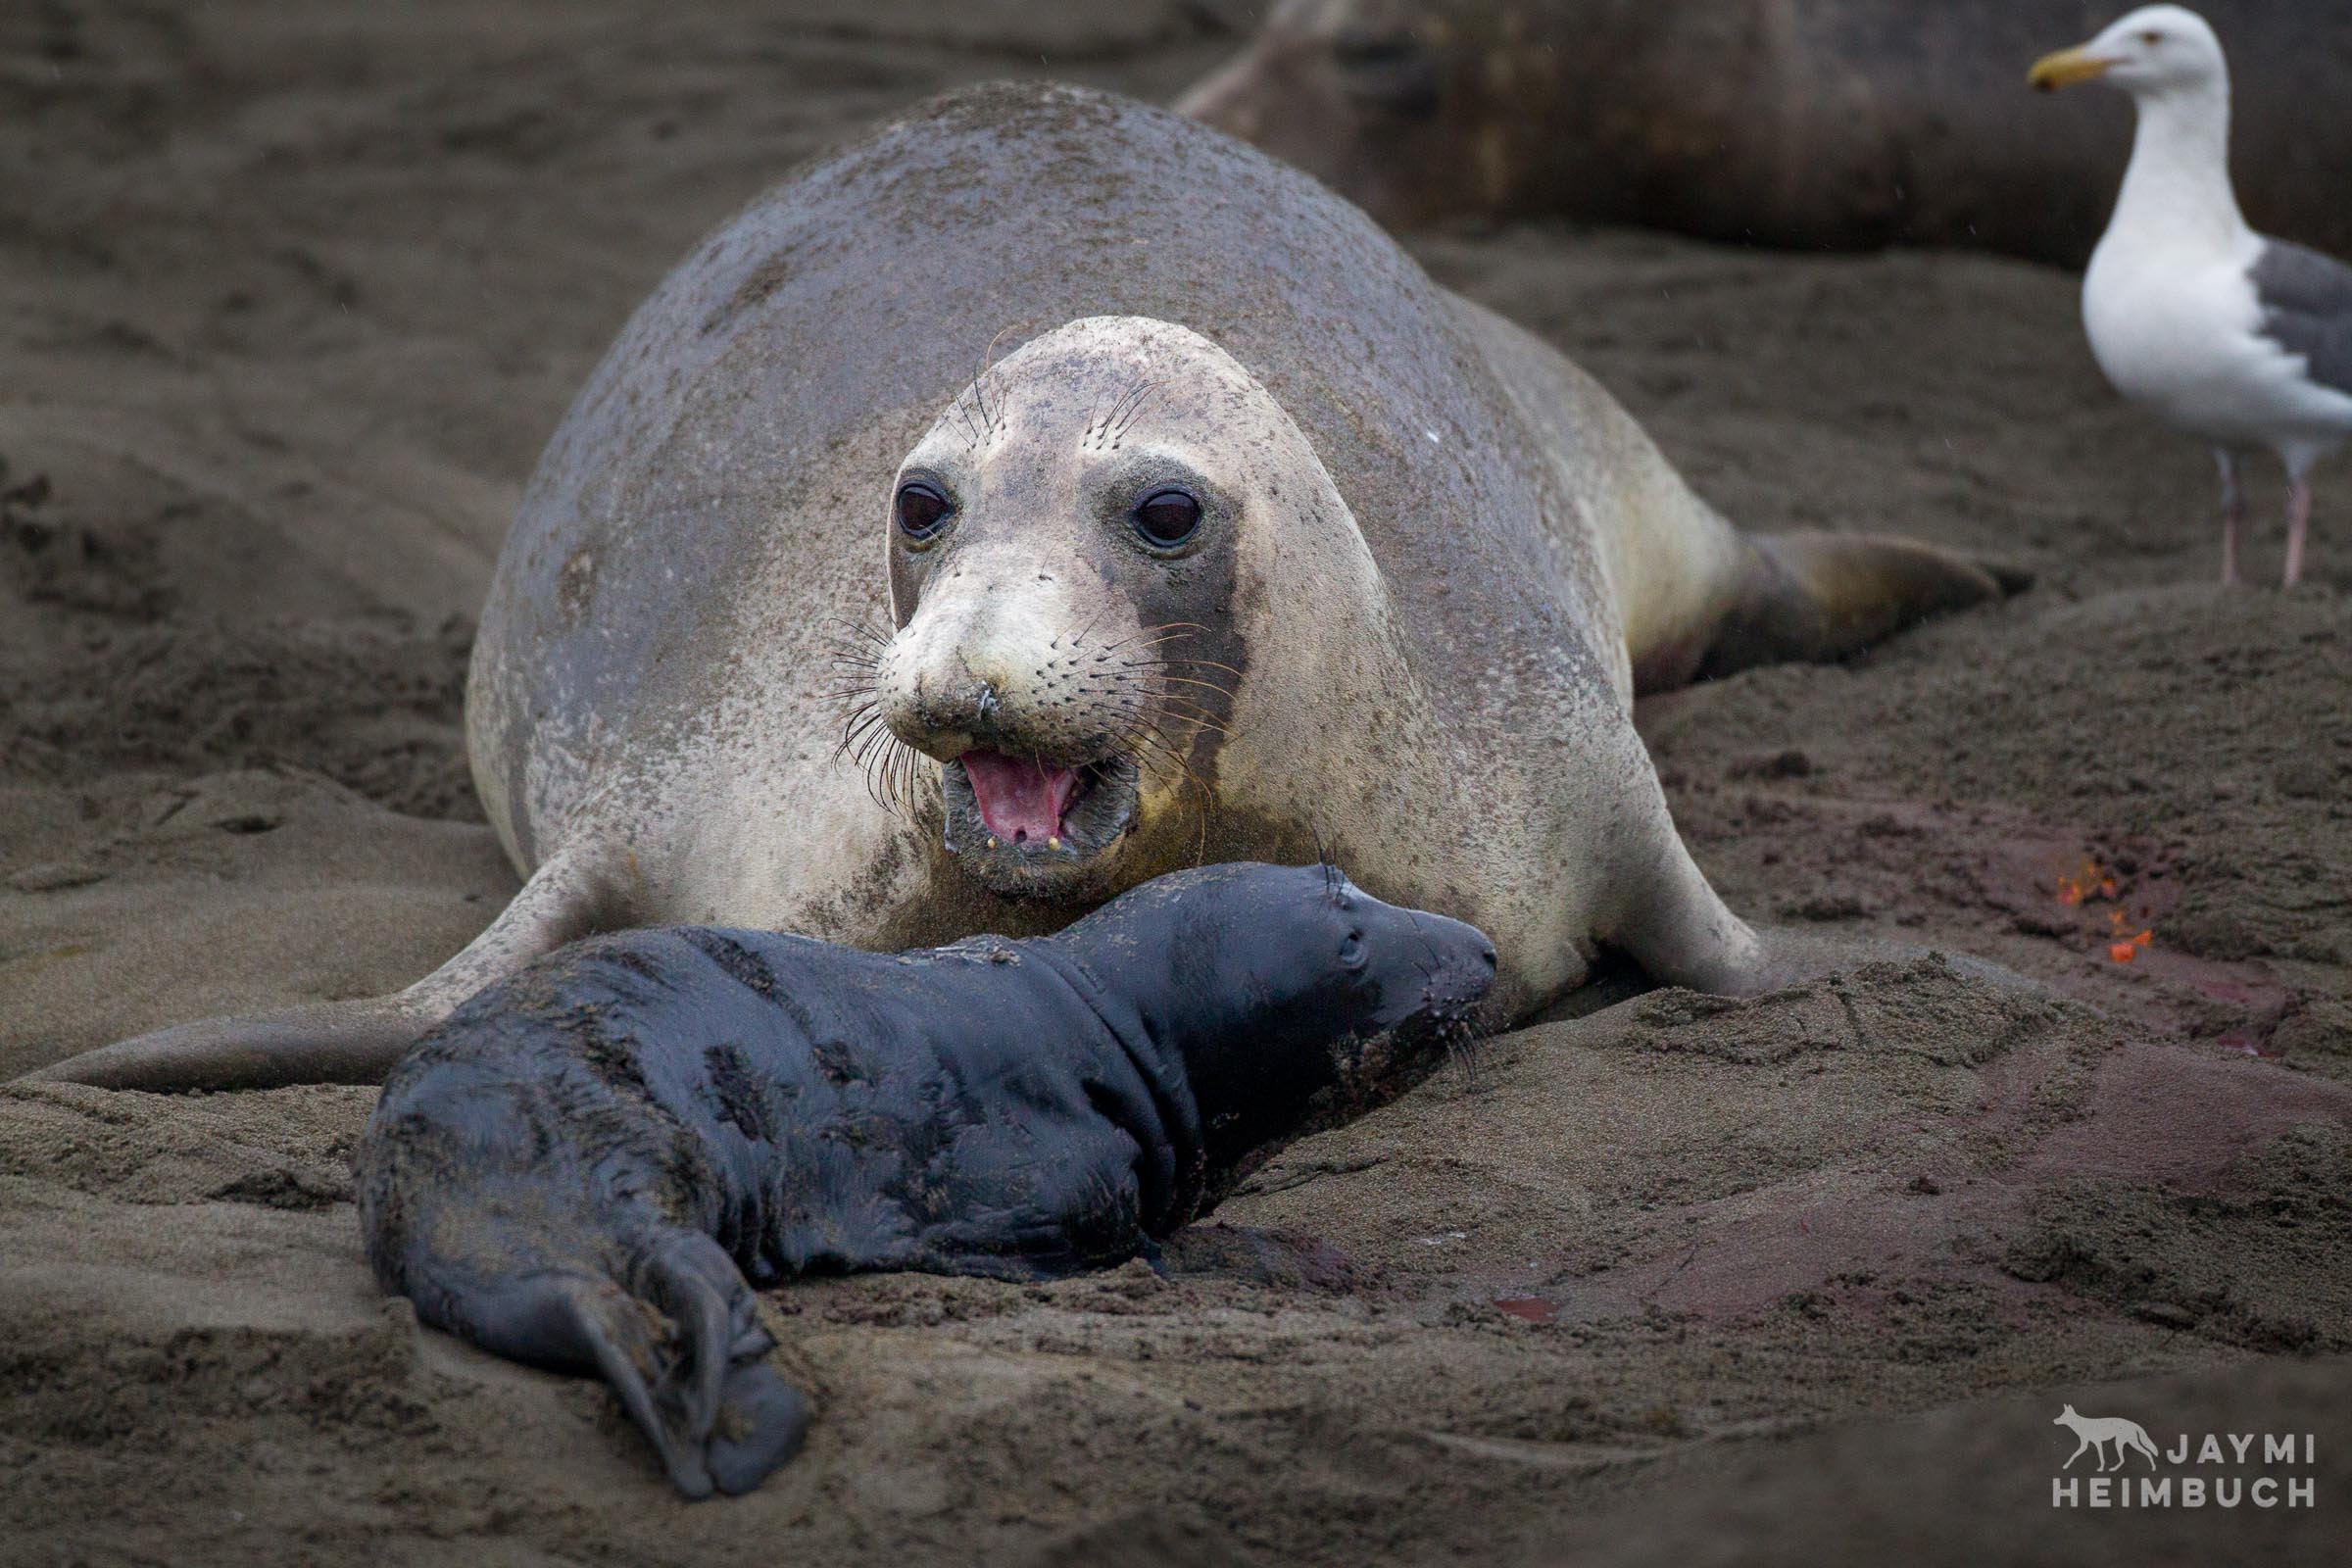 A female northern elephant seal (Mirounga angustirostris) inspects her pup after just giving birth